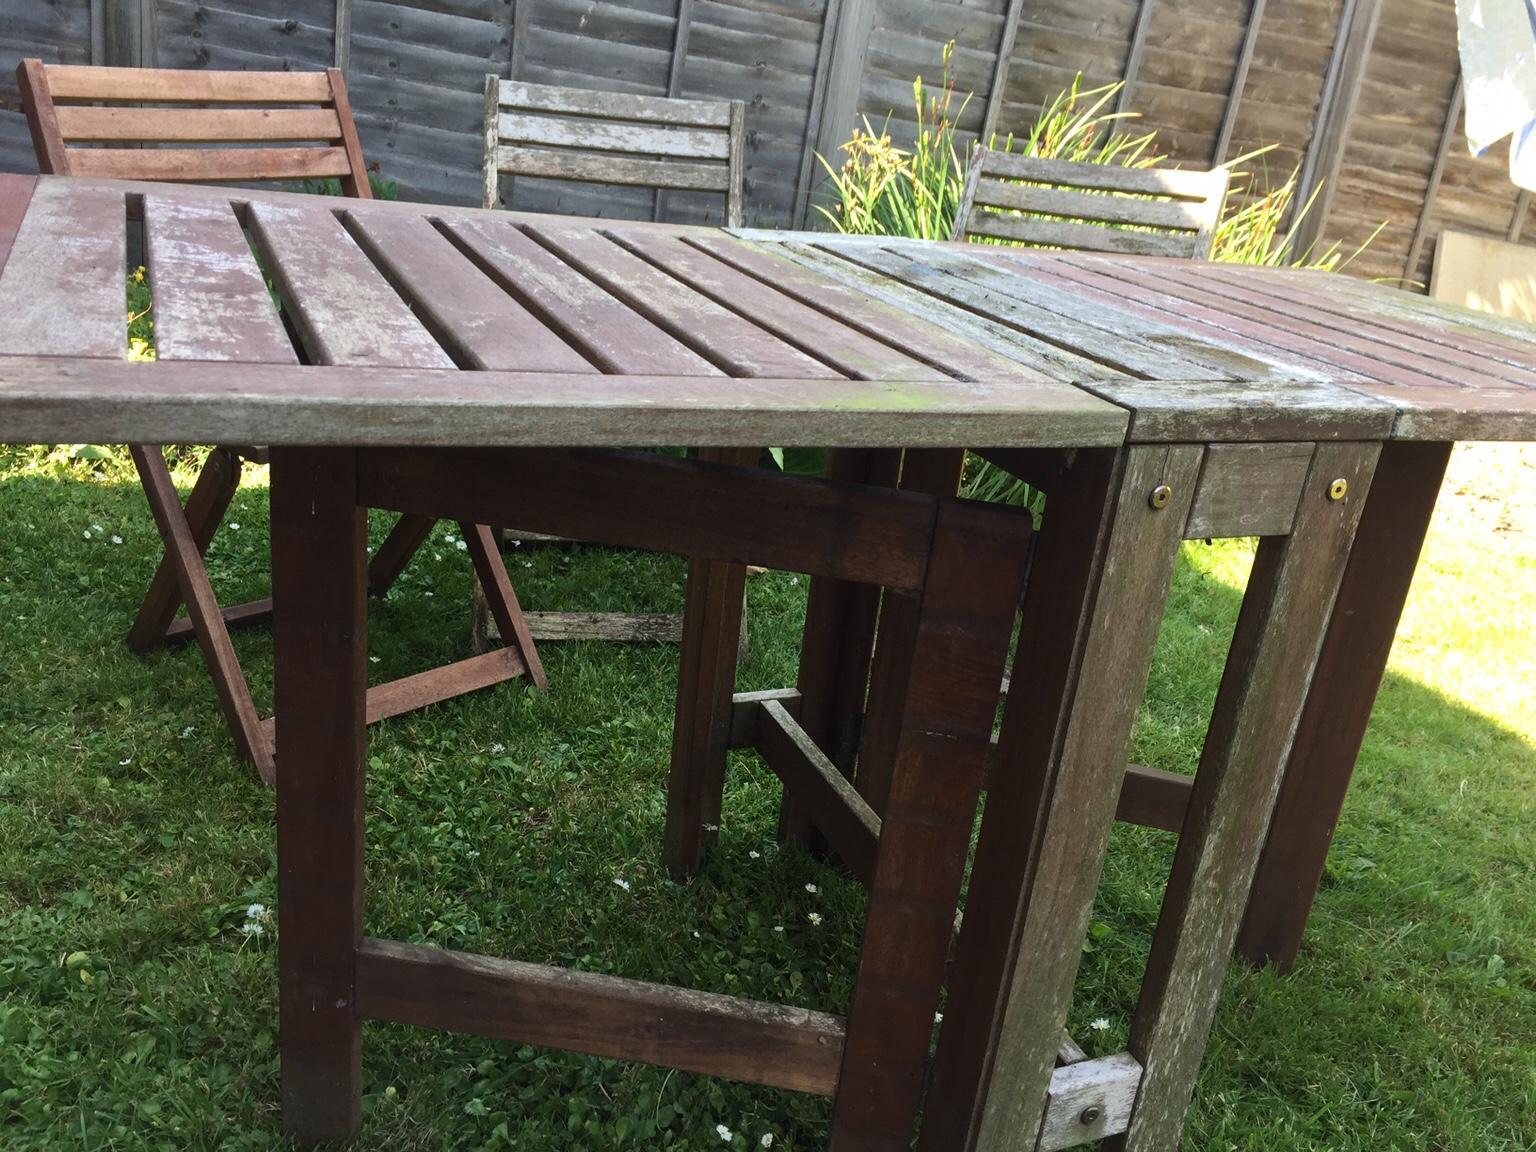 IKEA Gateleg Outdoor Table and Chairs in SG18 Biggleswade ...